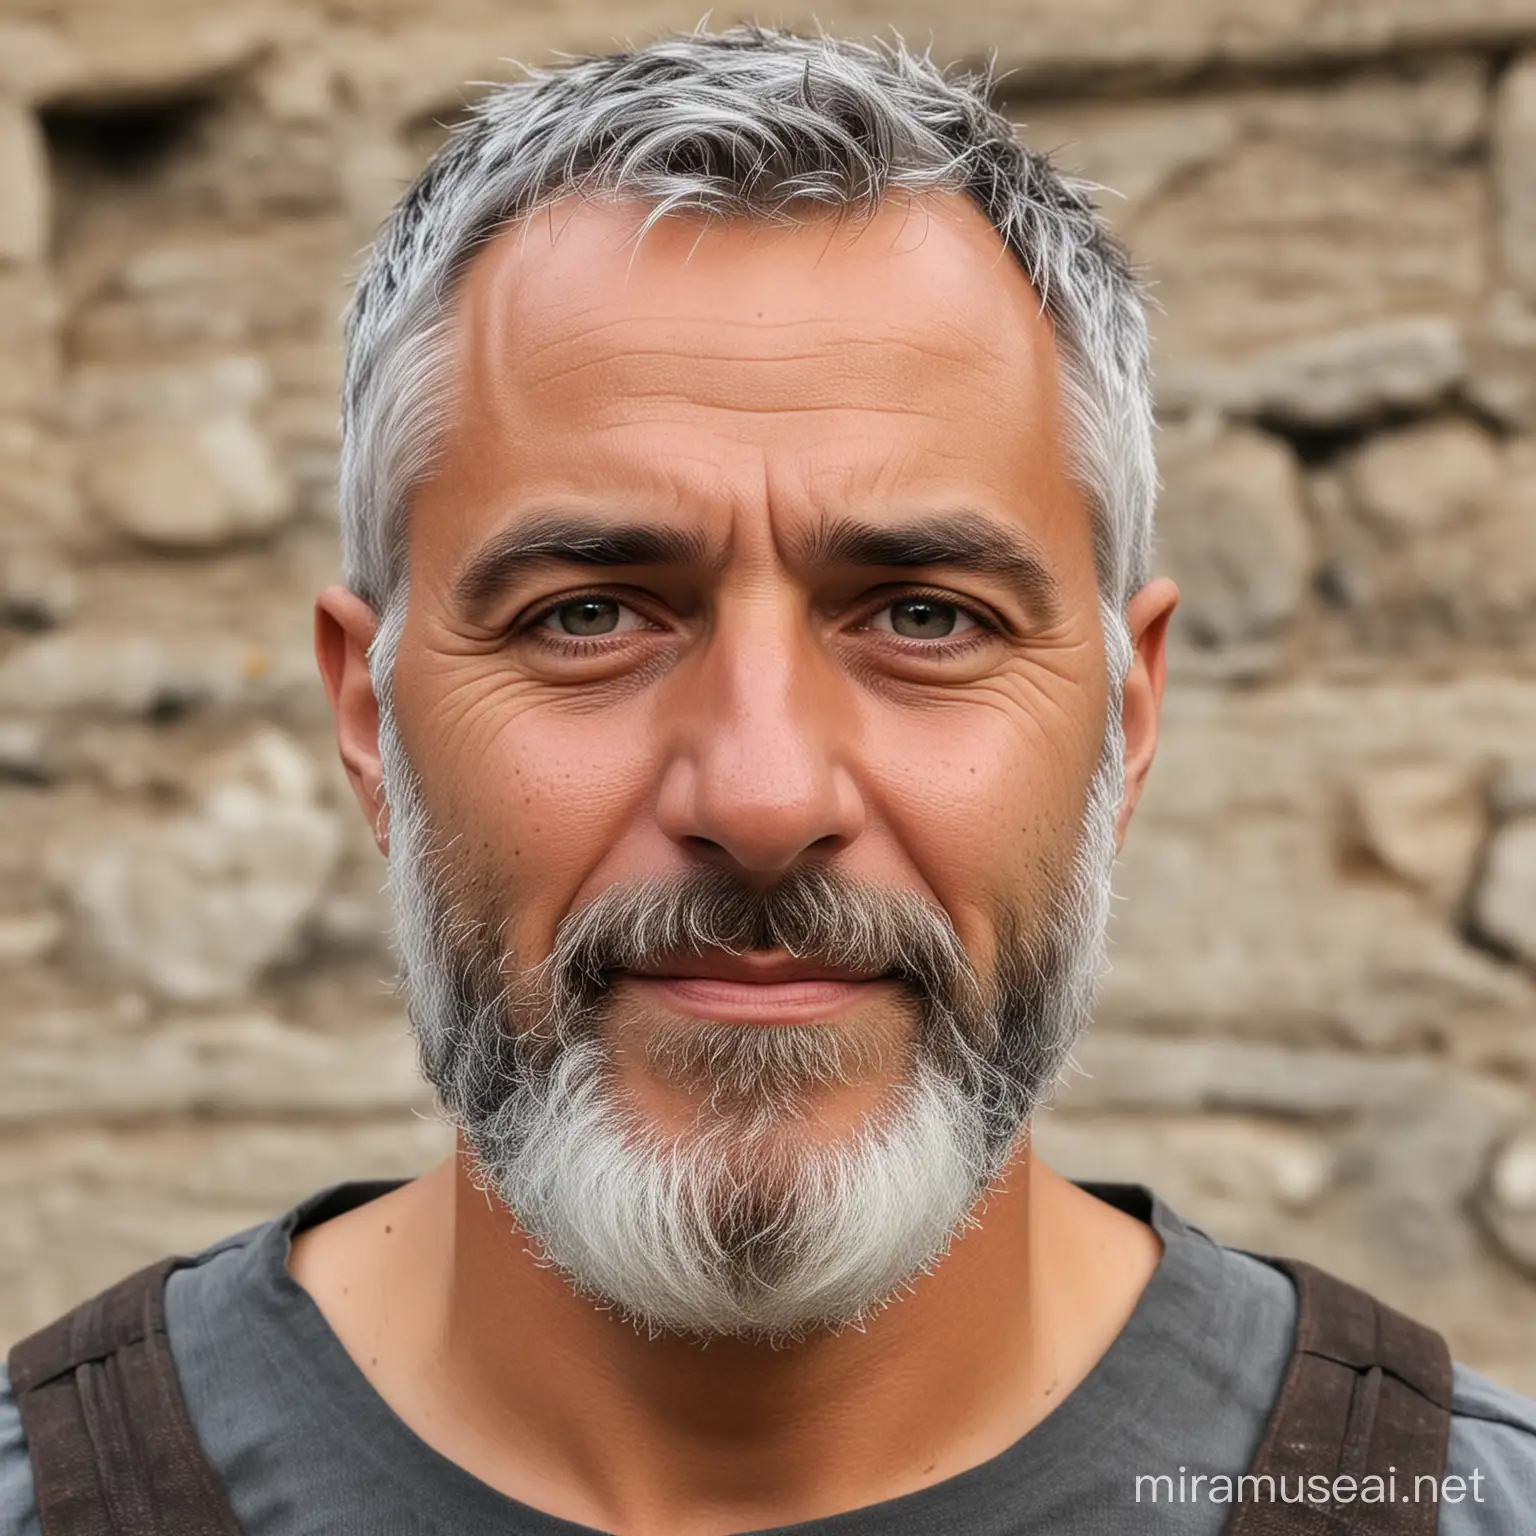 Mature Roman Gentleman with Greying Beard and Historical Attire